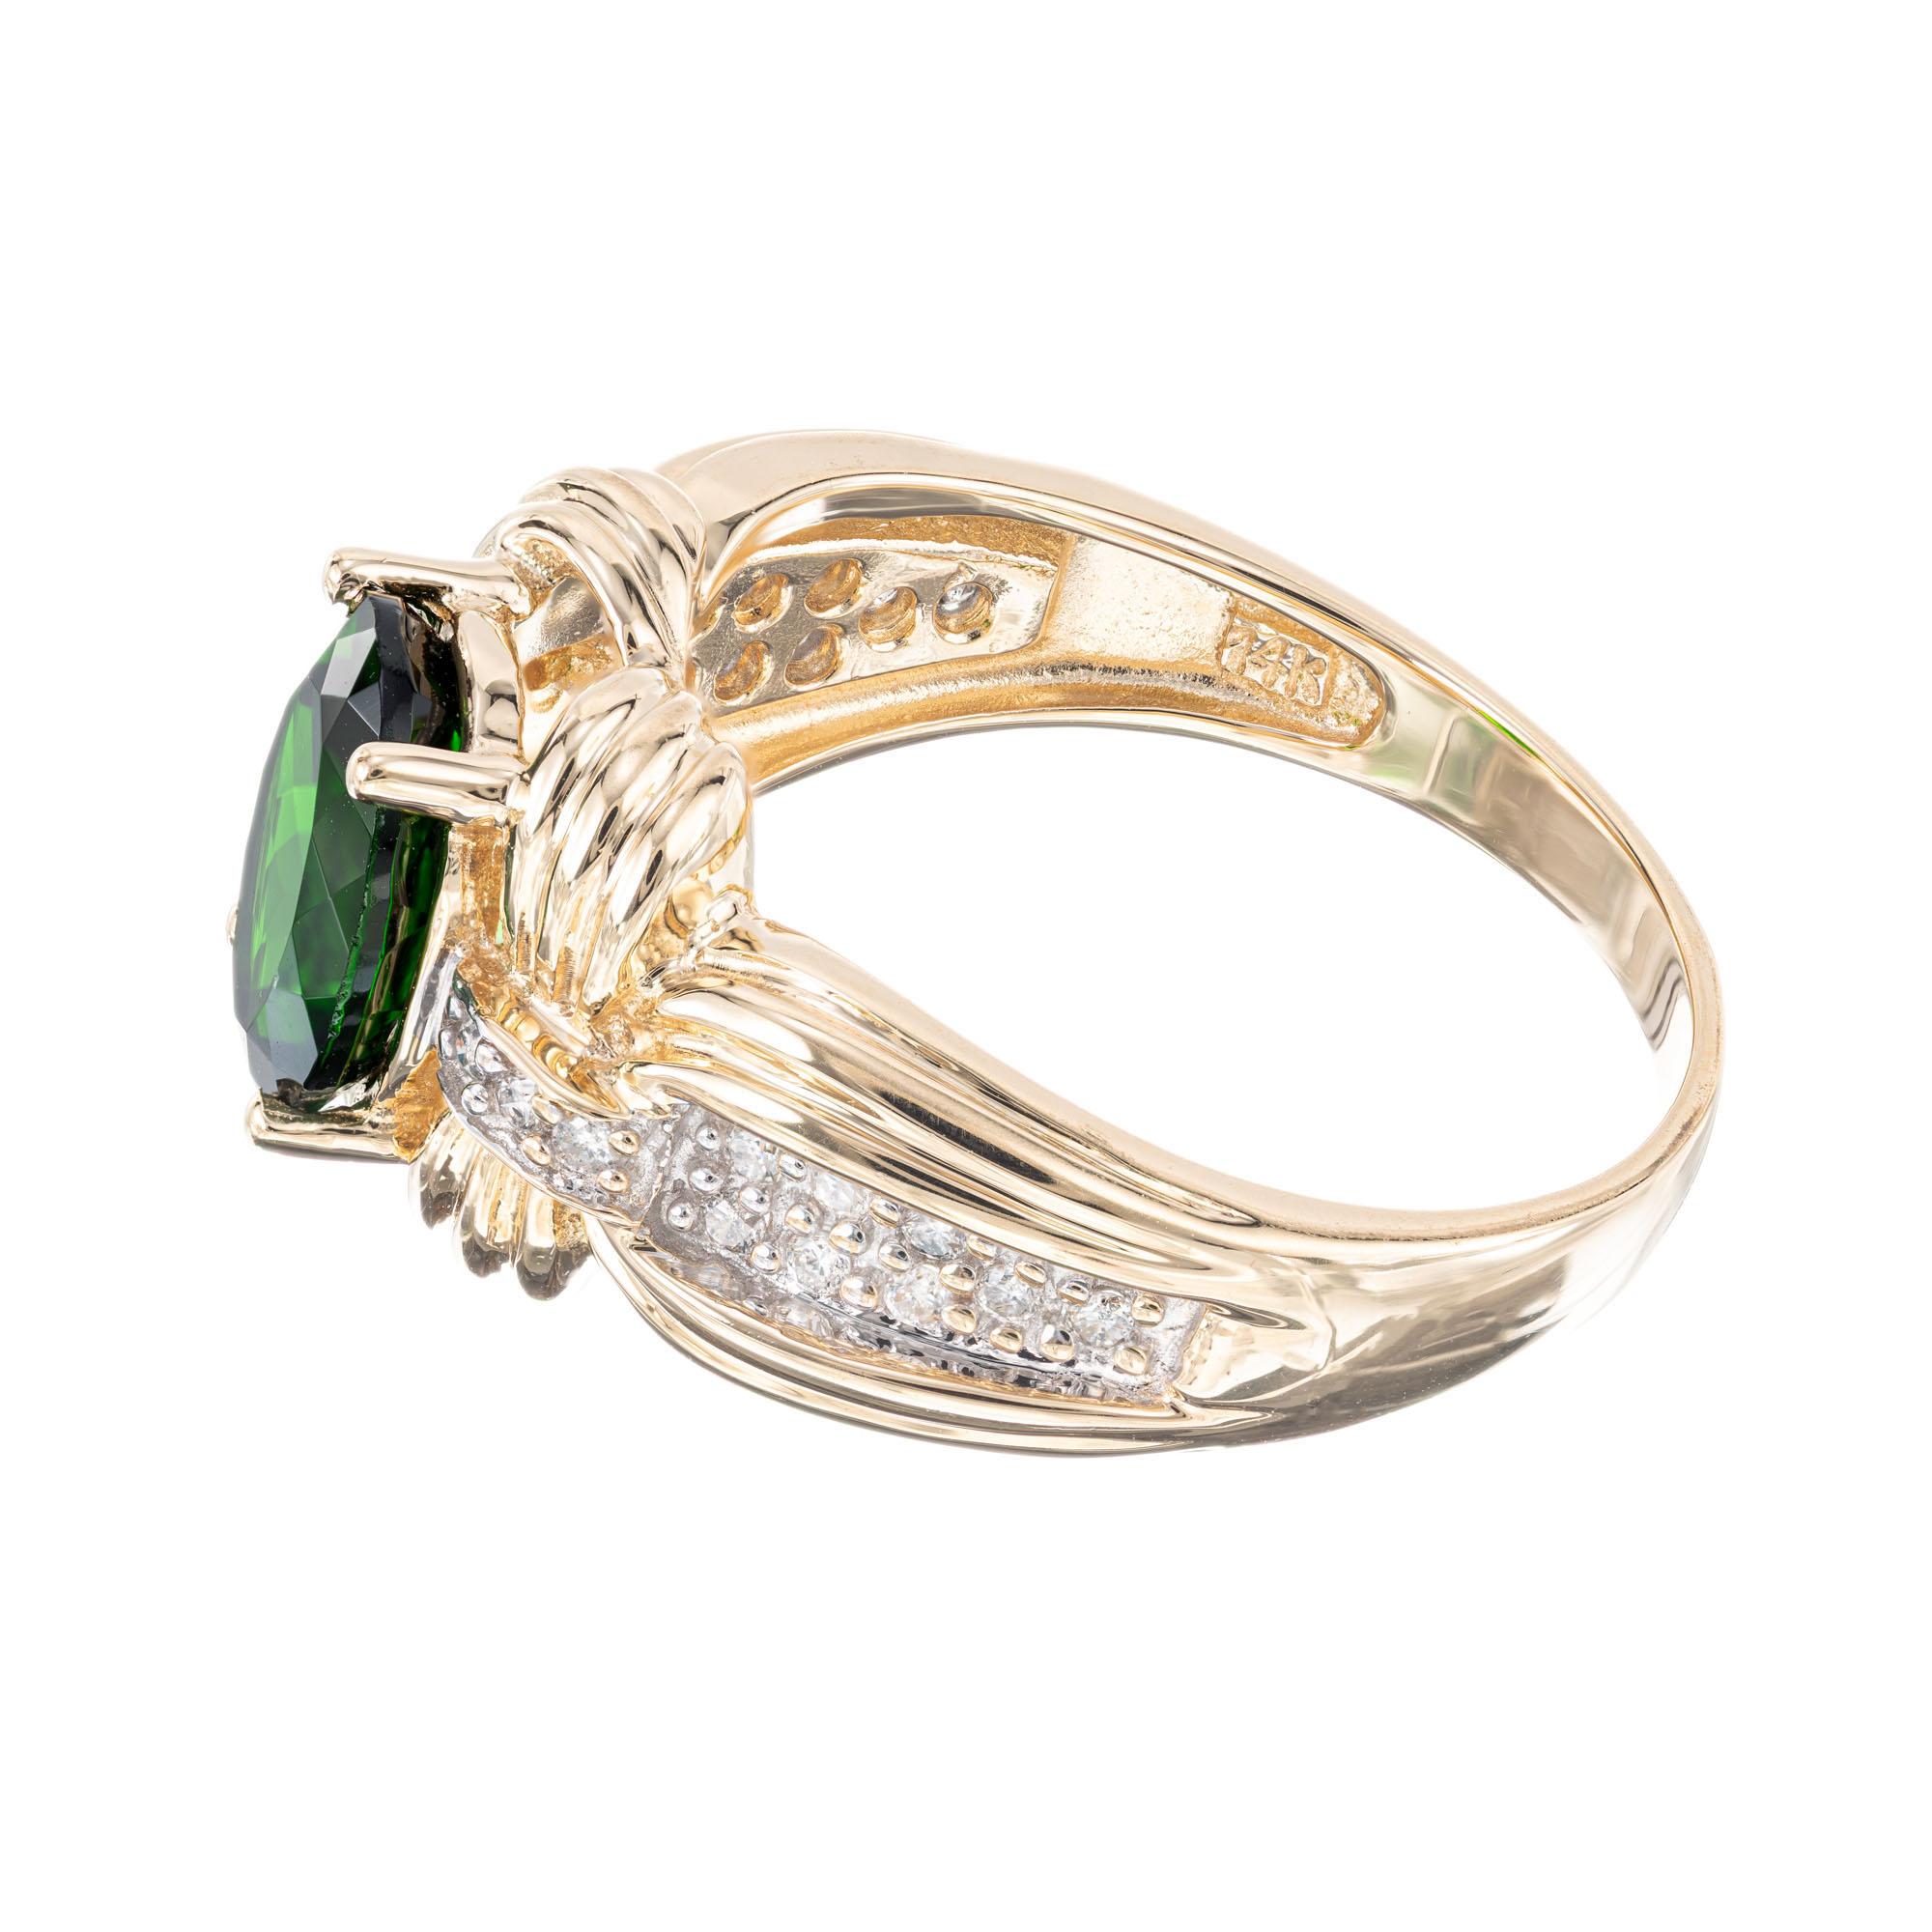 2.30 Carat Green Tourmaline Diamond Yellow Gold Ring In Excellent Condition For Sale In Stamford, CT